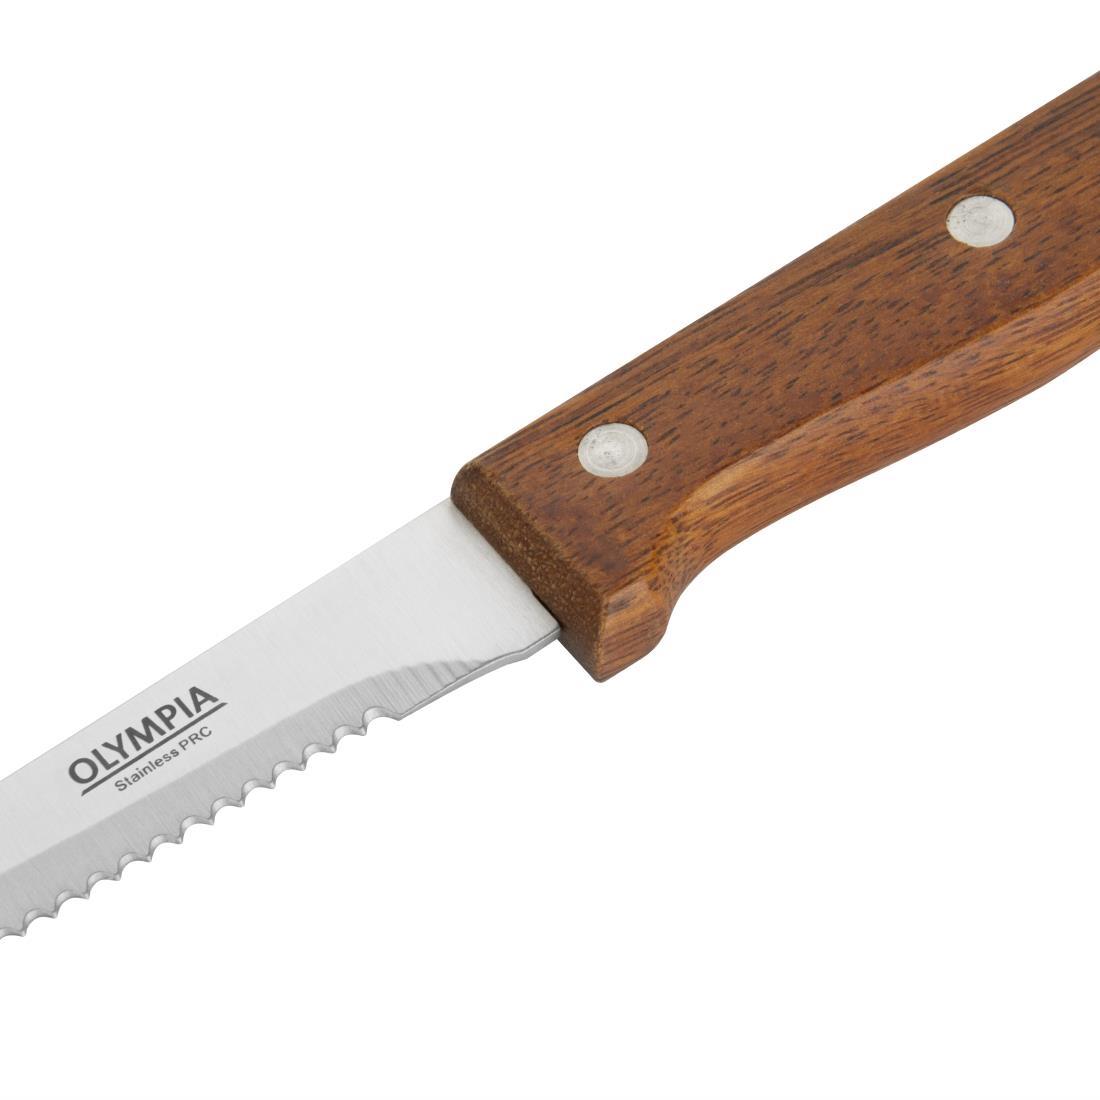 Olympia Steak Knives Wooden Handle (Pack of 12) - C136  - 4